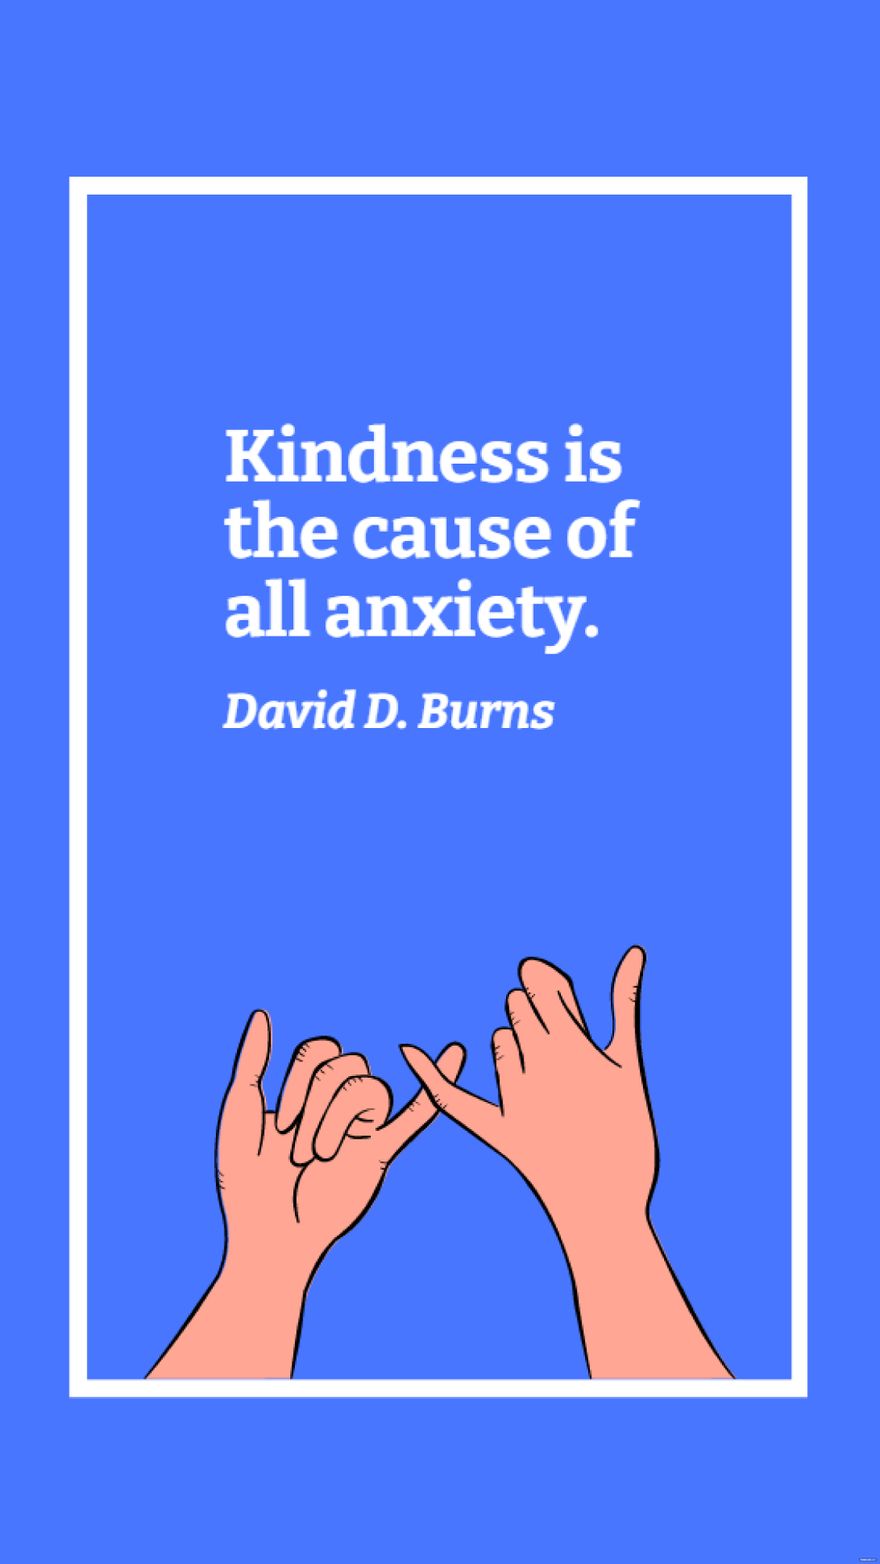 David D. Burns - Kindness is the cause of all anxiety.